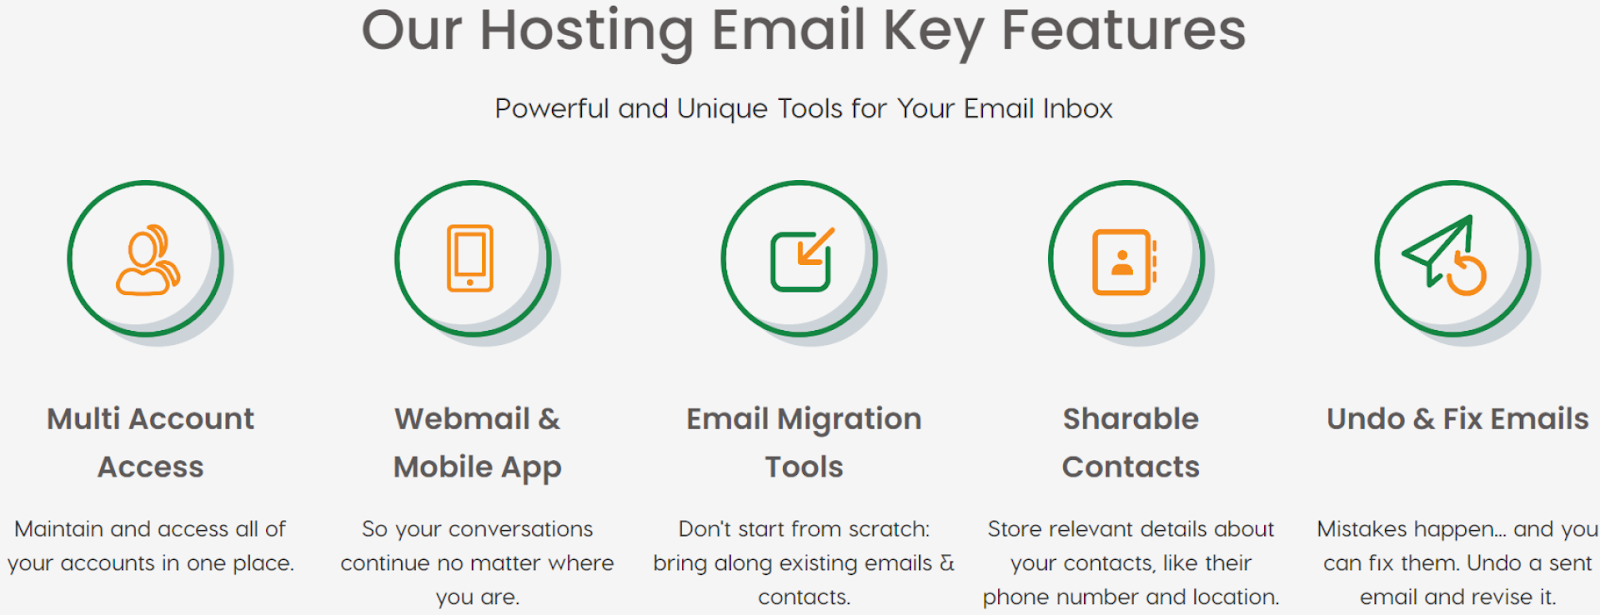 A2 Hosting Email Hosting Features